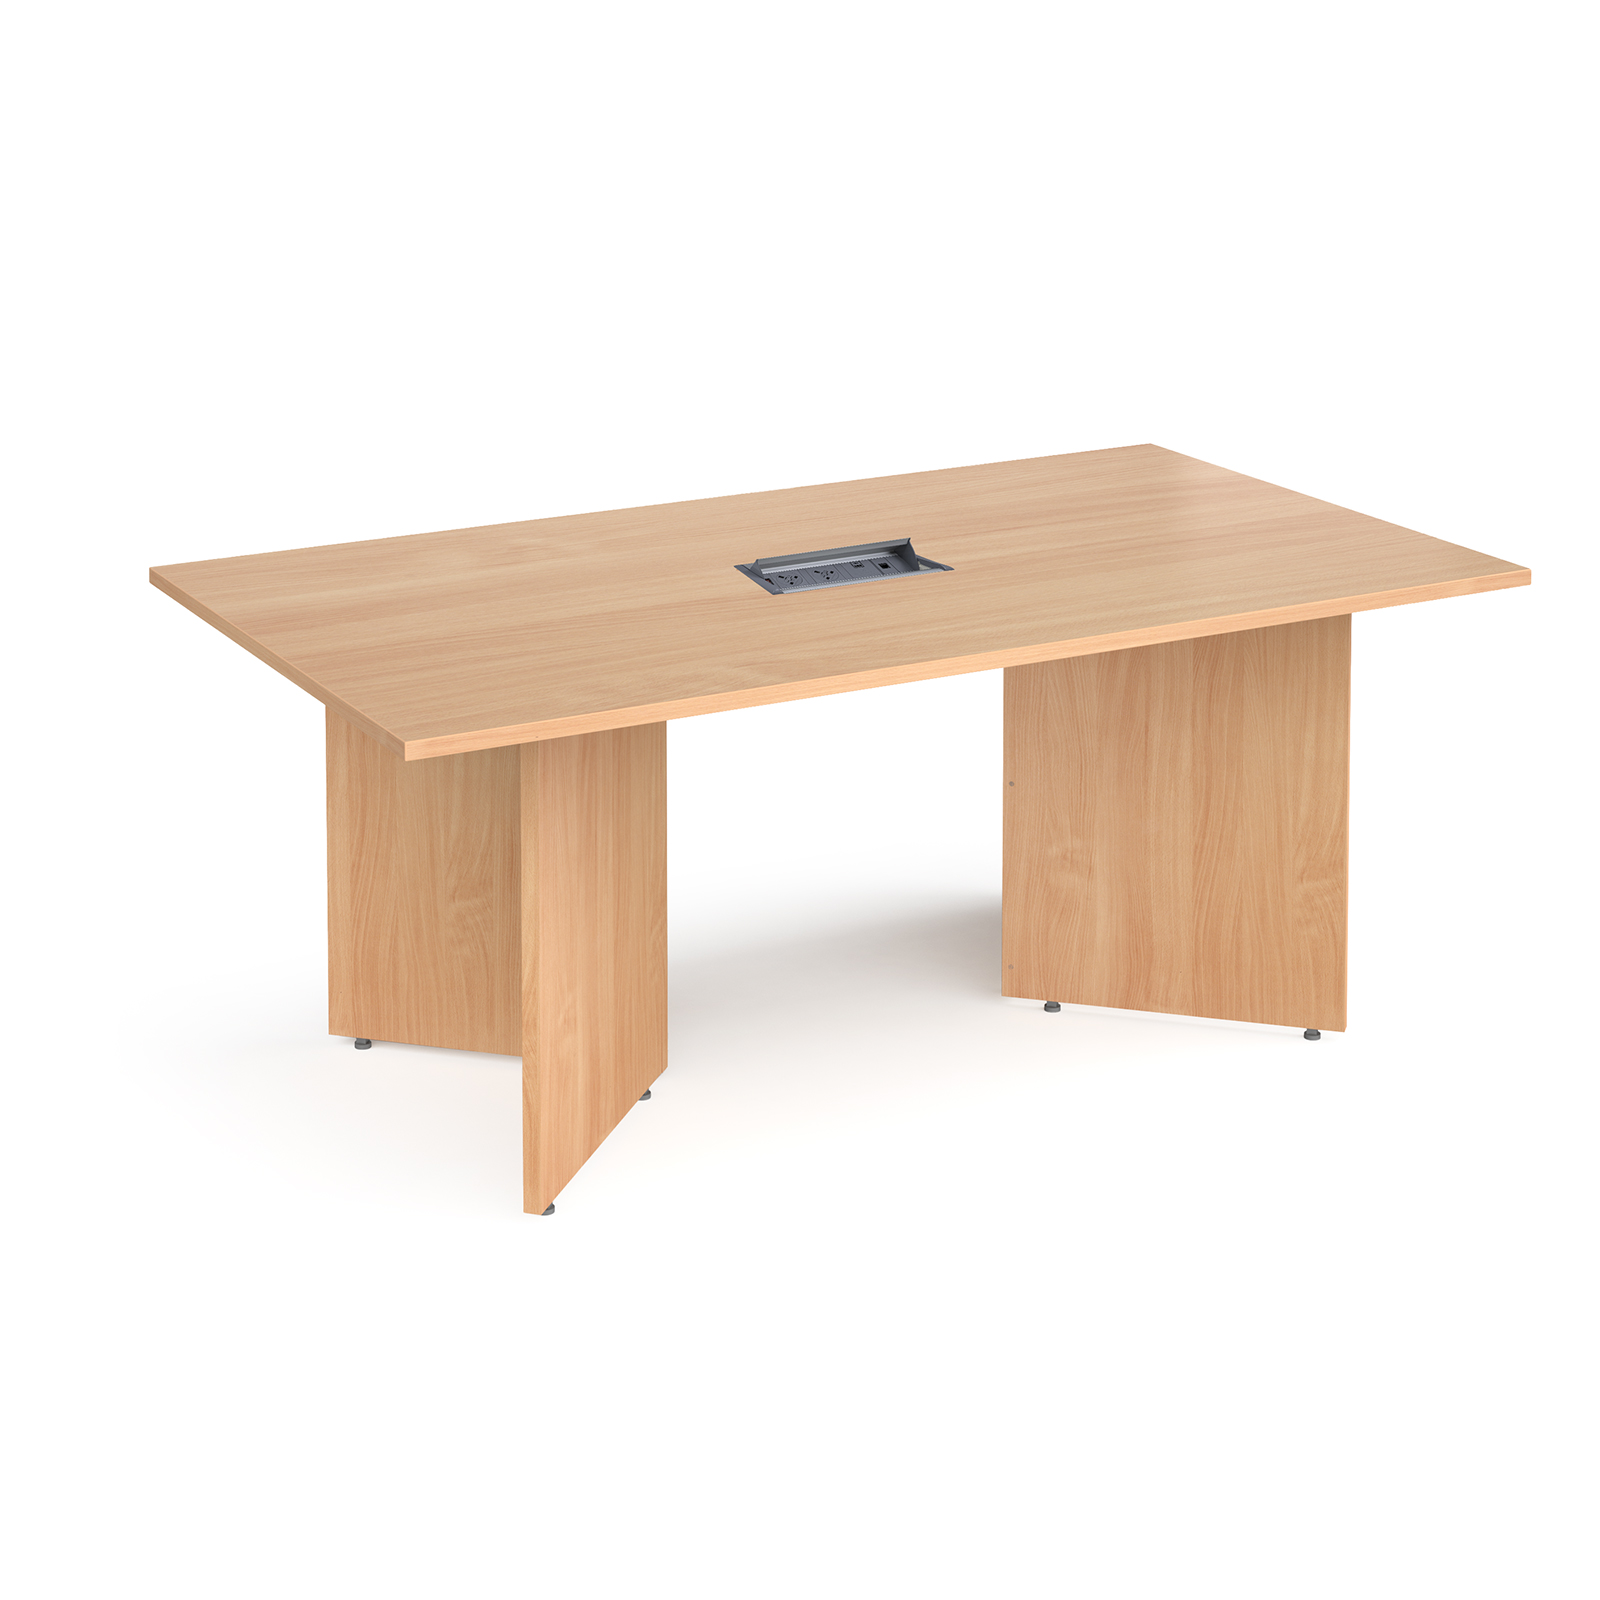 Boardroom / Meeting Arrow head leg rectangular boardroom table 1800mm x 1000mm in beech with central cutout and Aero power module